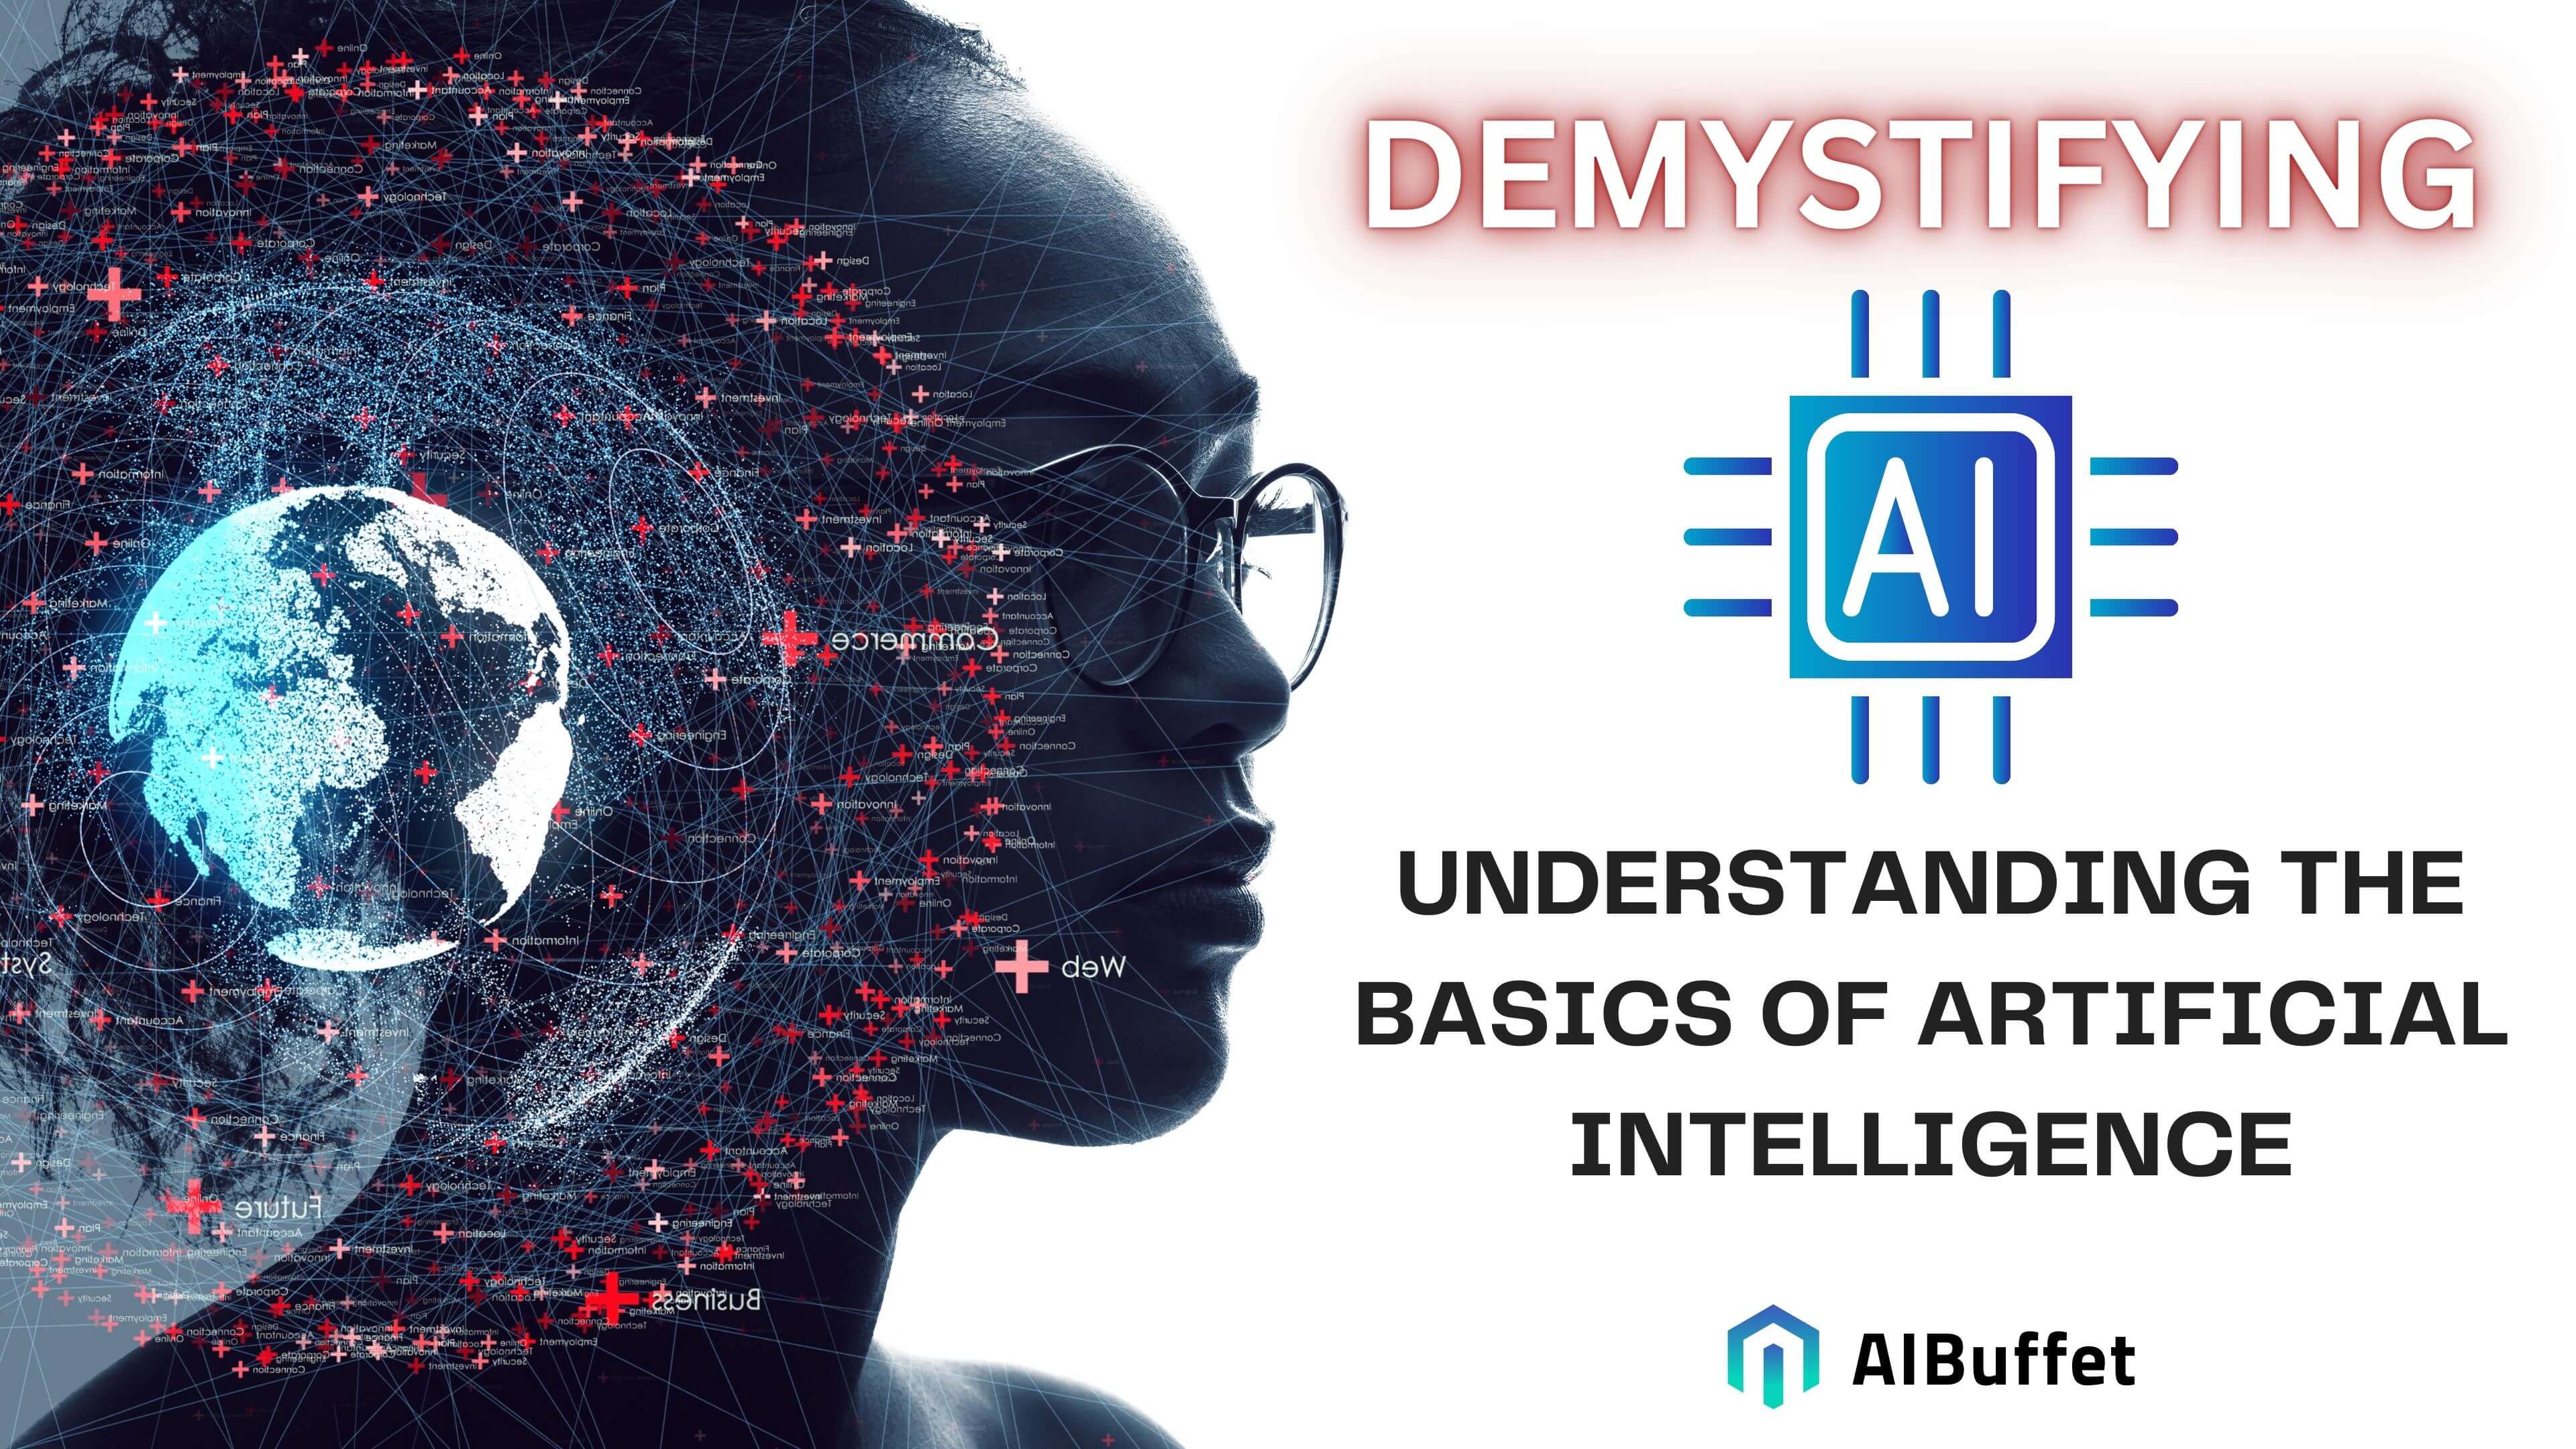 Demystifying AI: Understanding the Basics of Artificial Intelligence